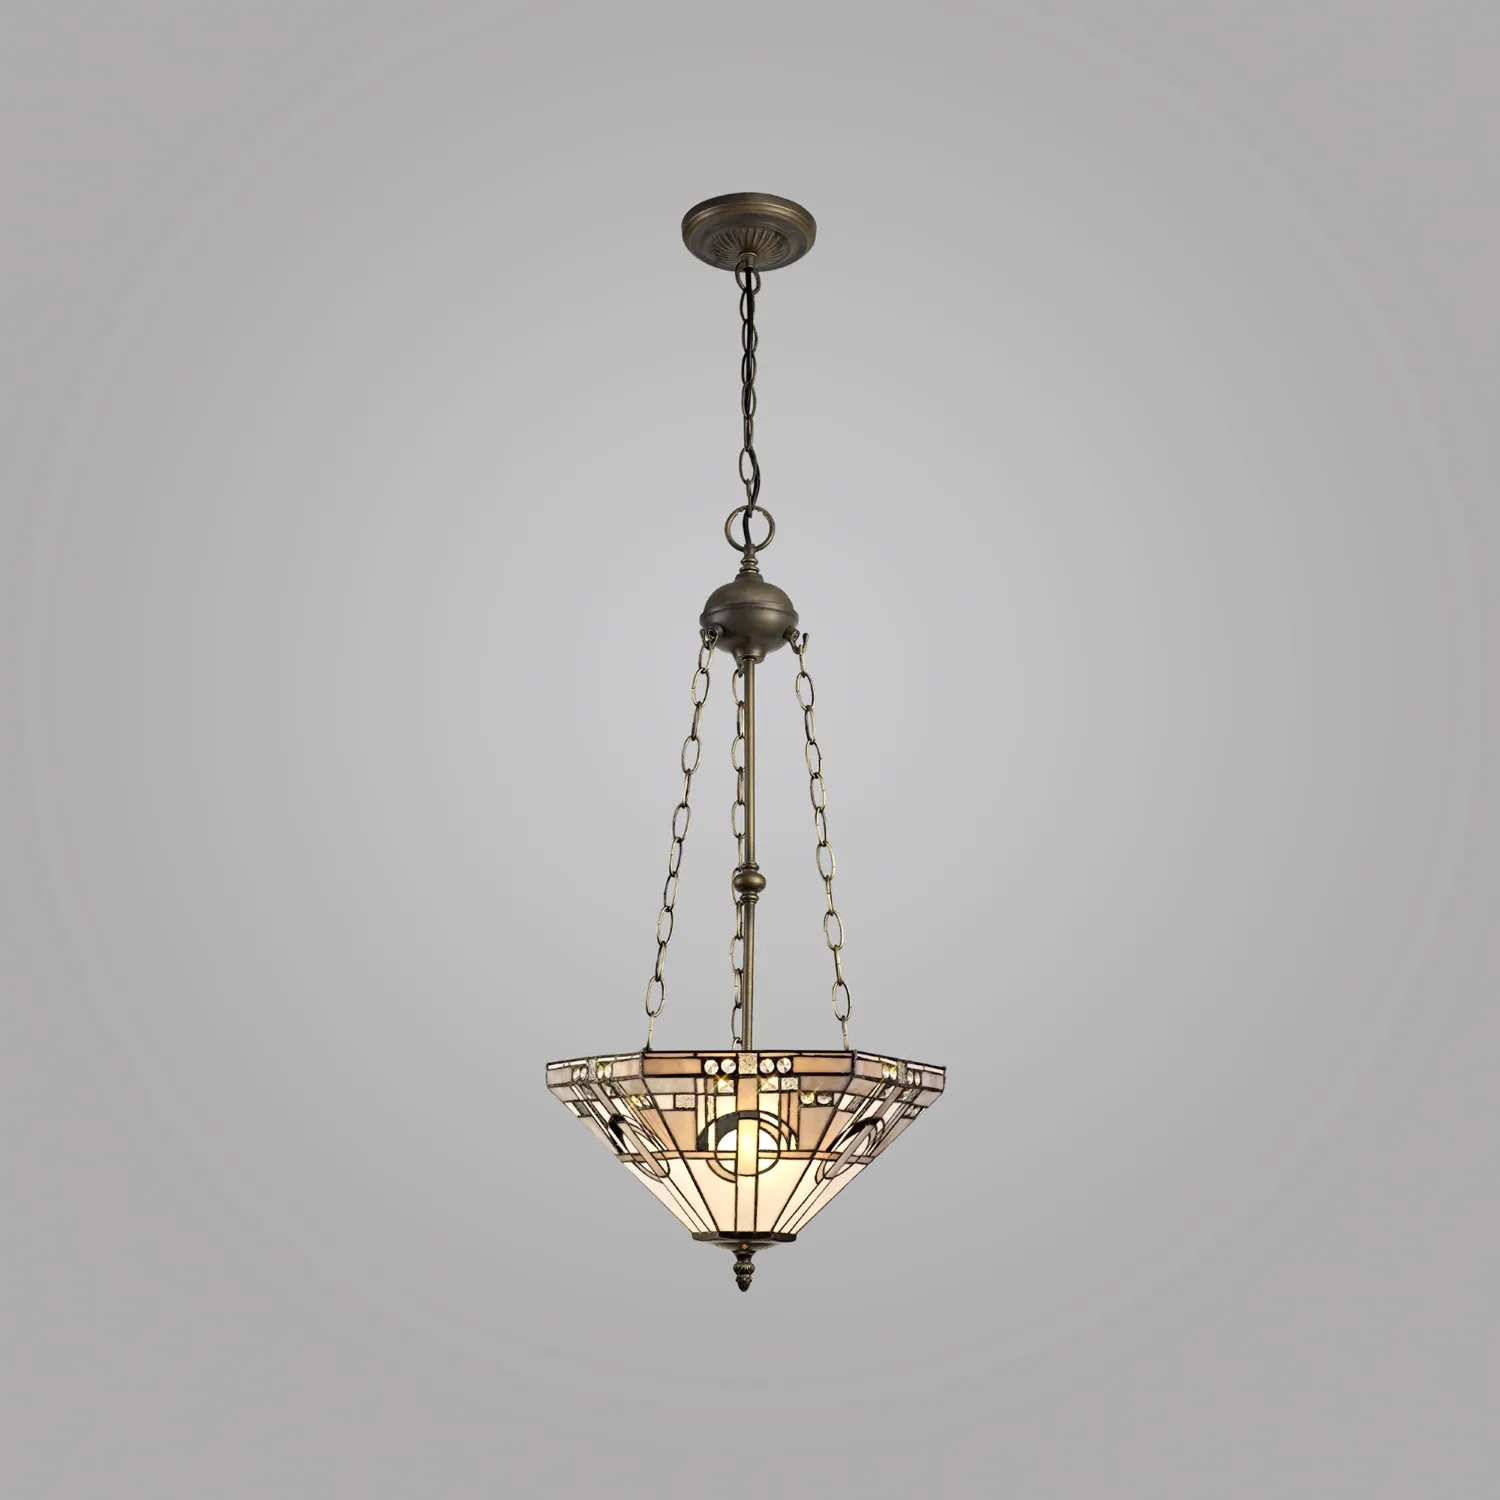 Knebworth 3 Light Uplighter Pendant E27 With 40cm Tiffany Shade, White Grey Black Clear Crystal Aged Antique Brass